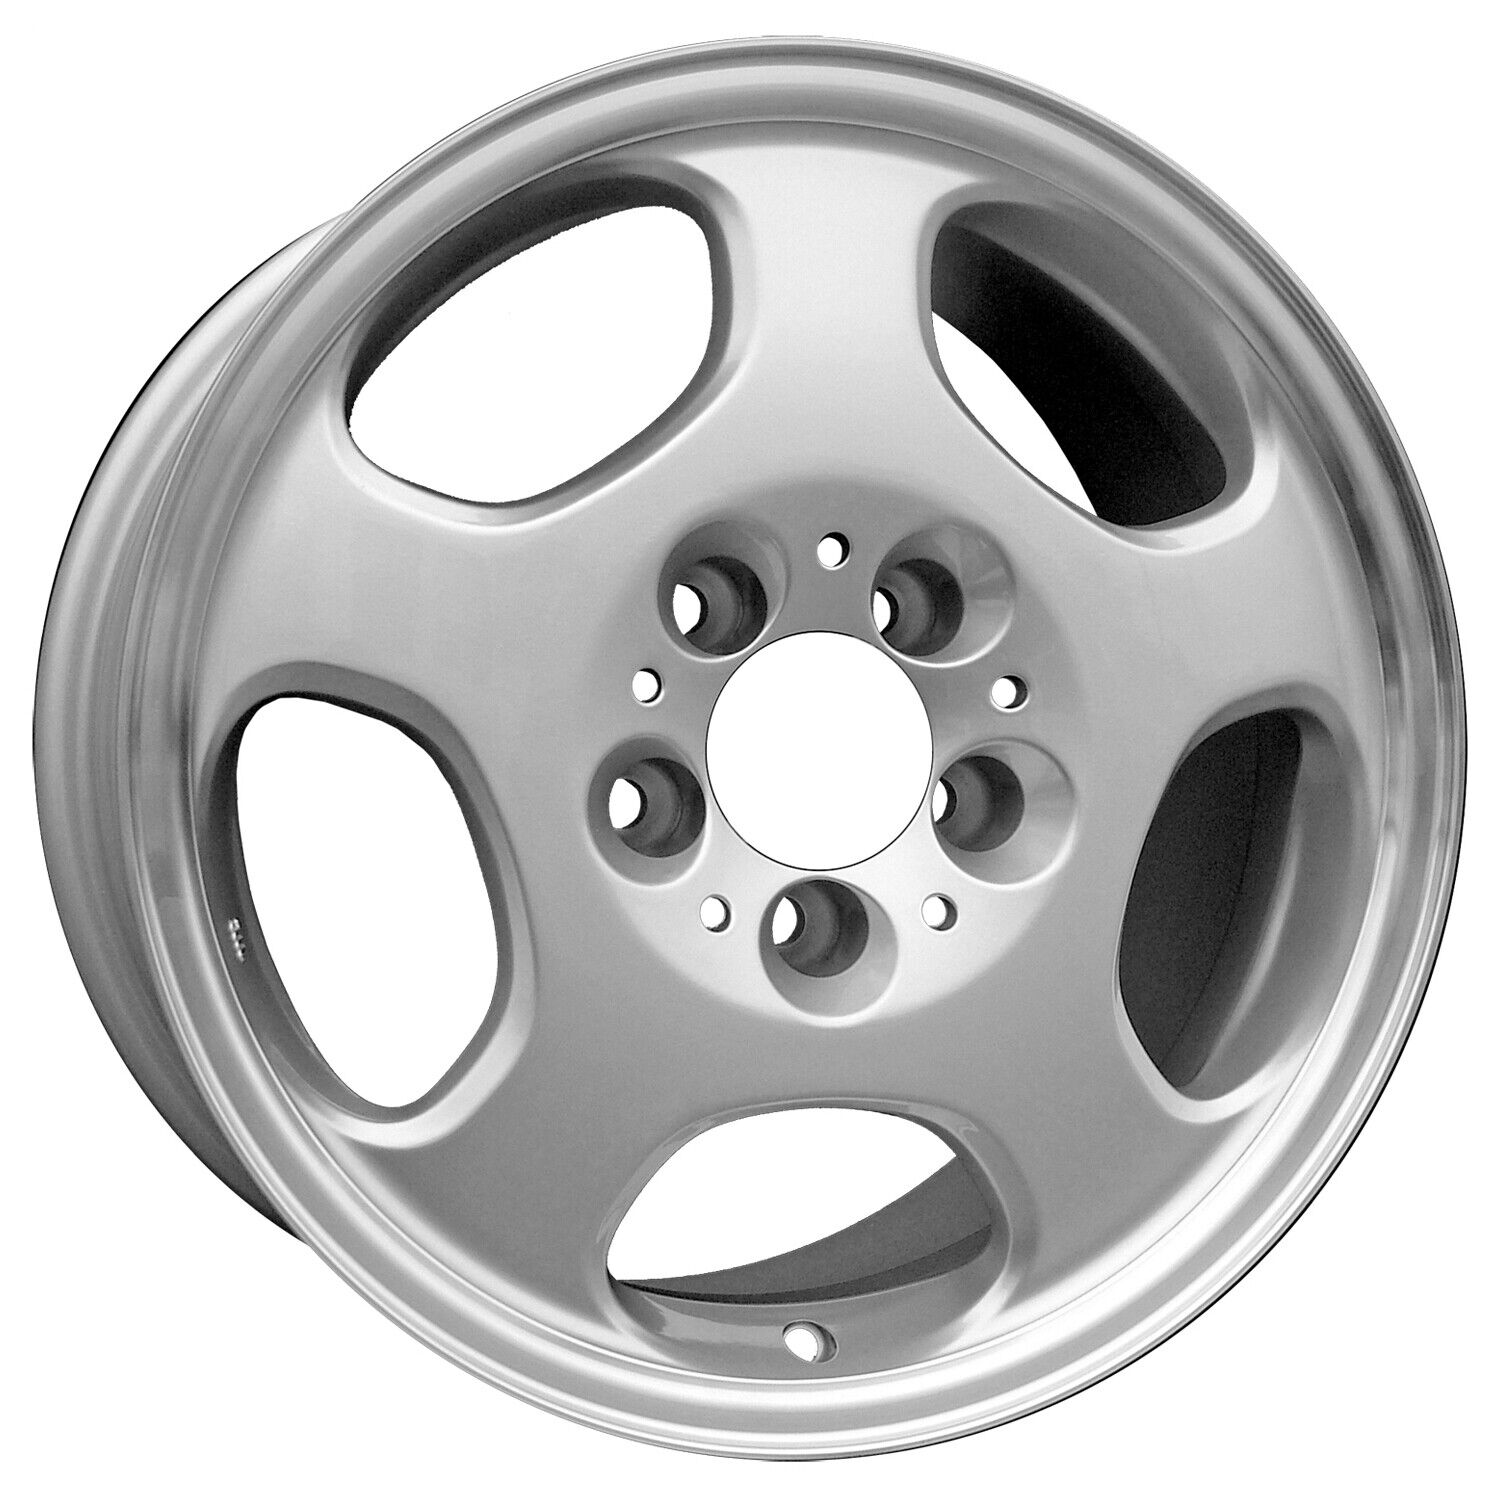 Refurbished 17x7.5 Painted Silver Wheel fits 2000-2002 Mercedes E430 560-65237